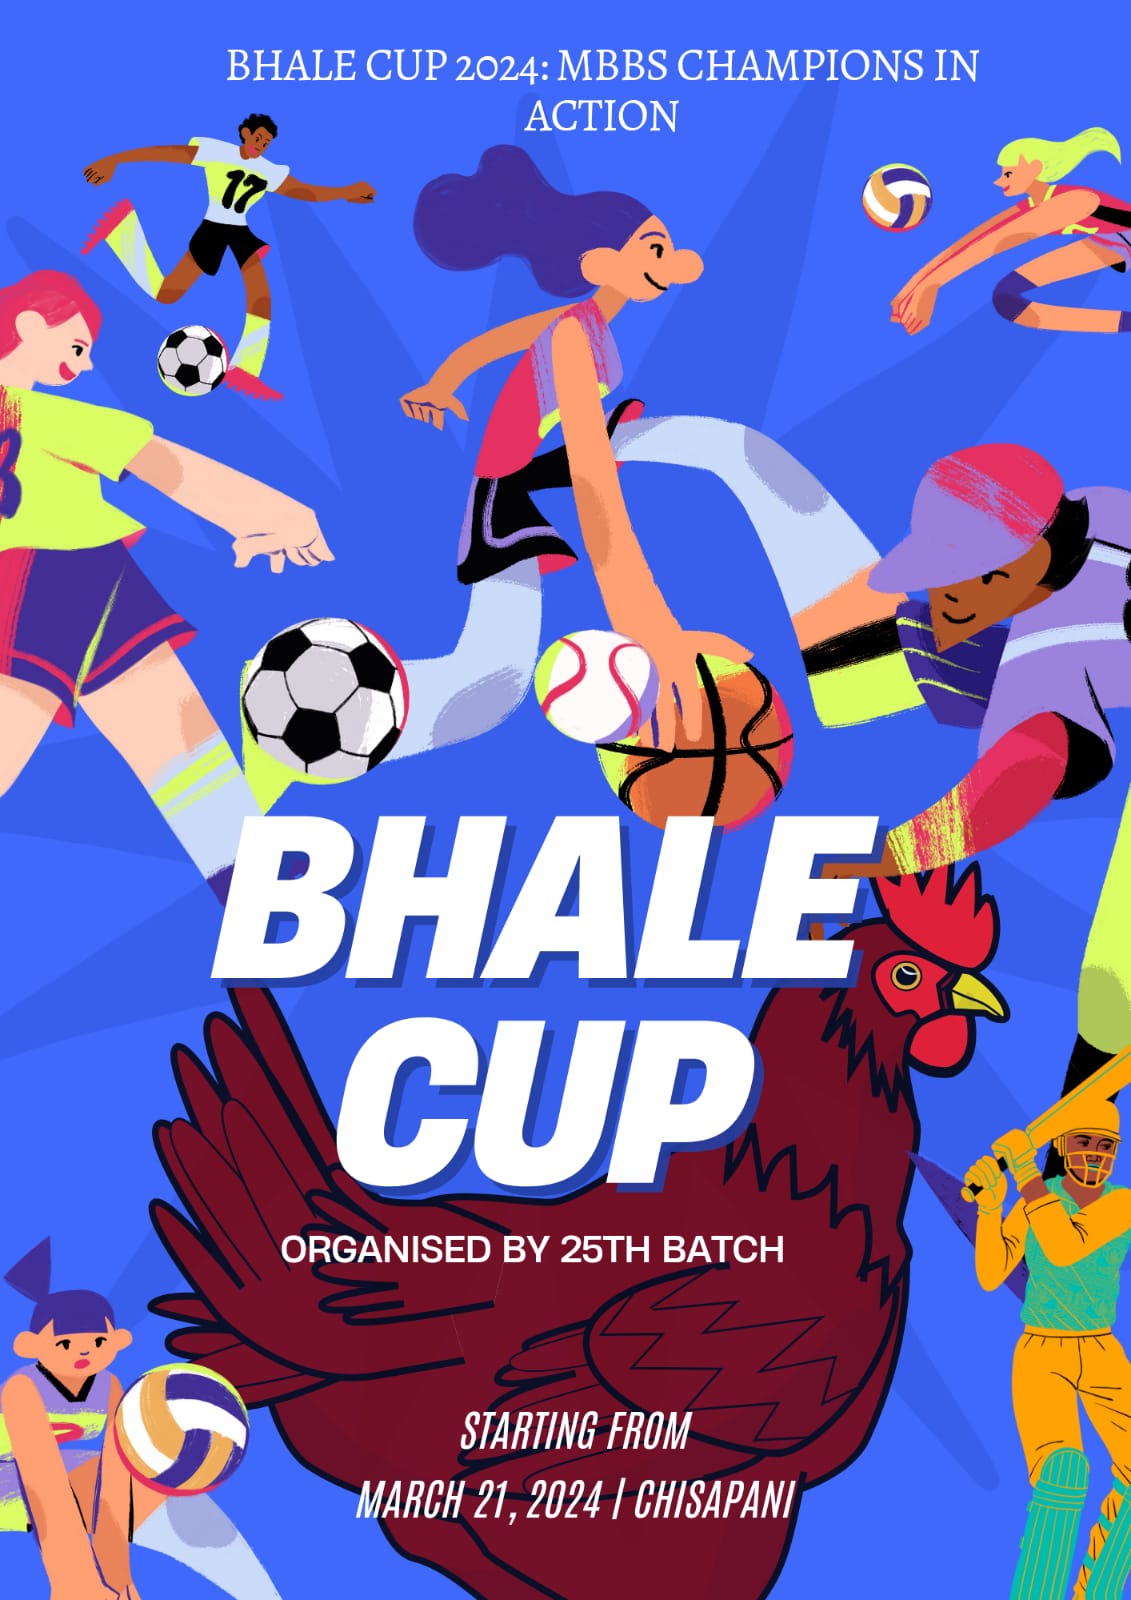 Bhale cup